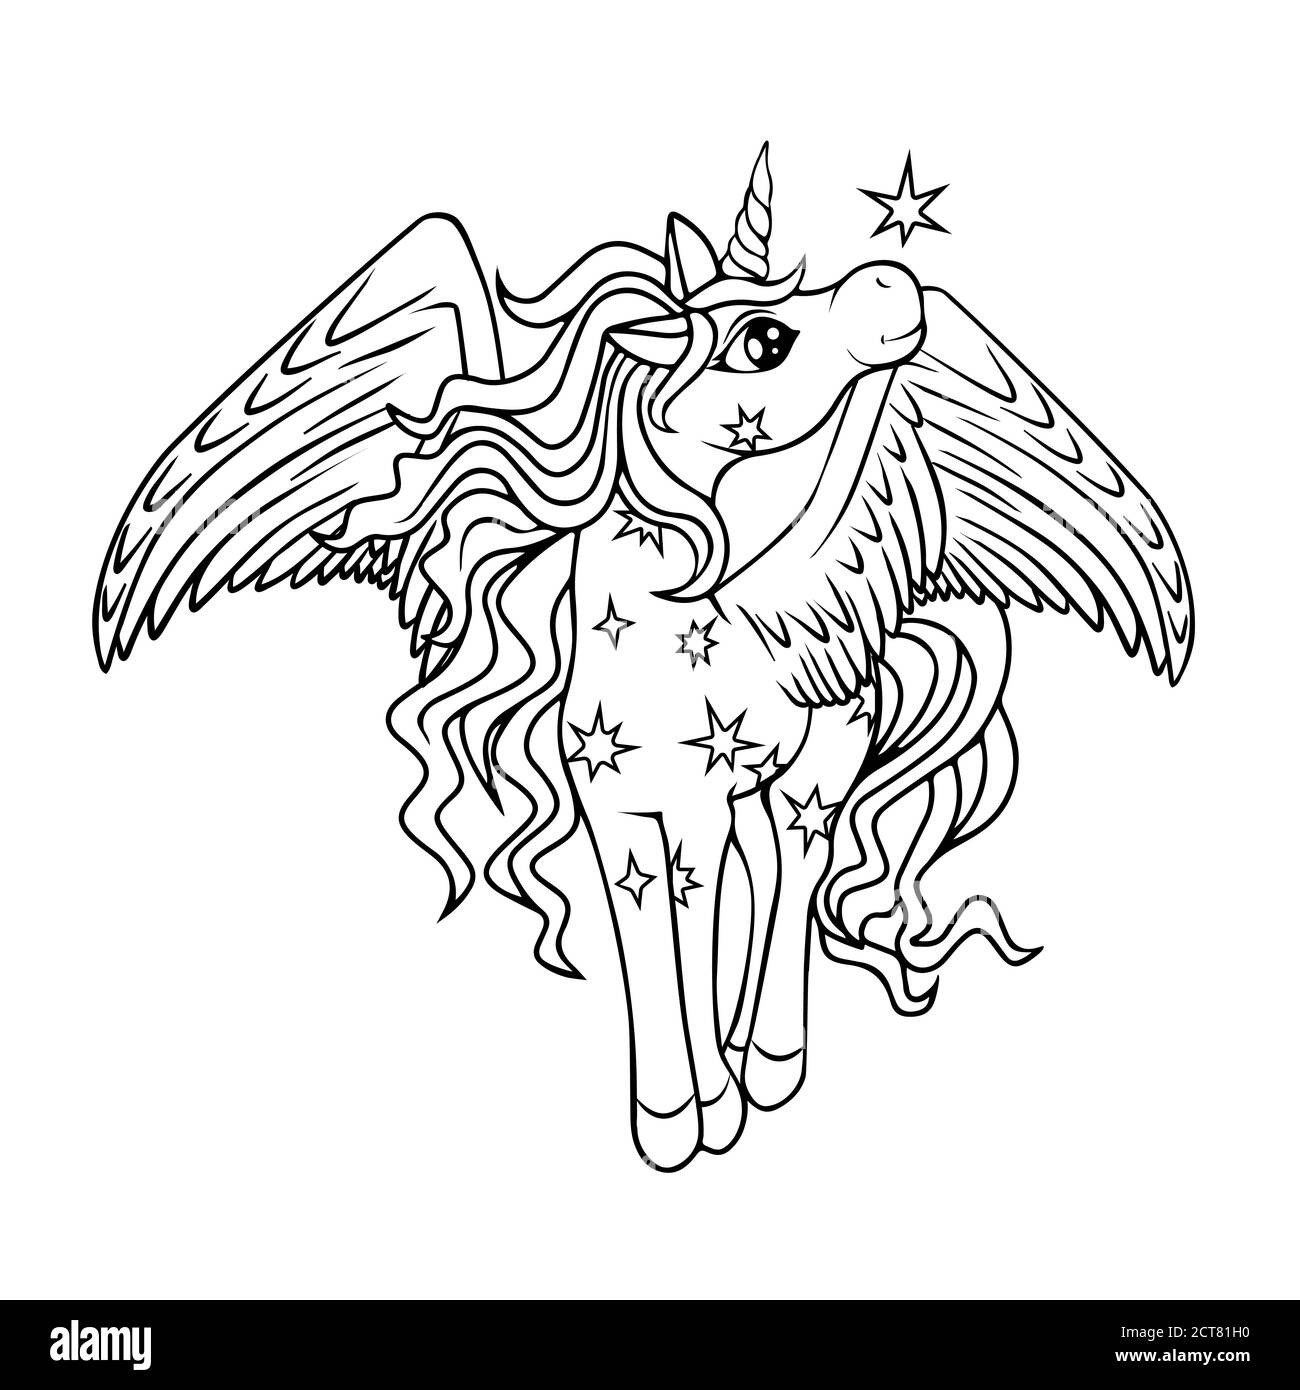 Cute magical winged unicorn with stars. Black outline. Coloring ...